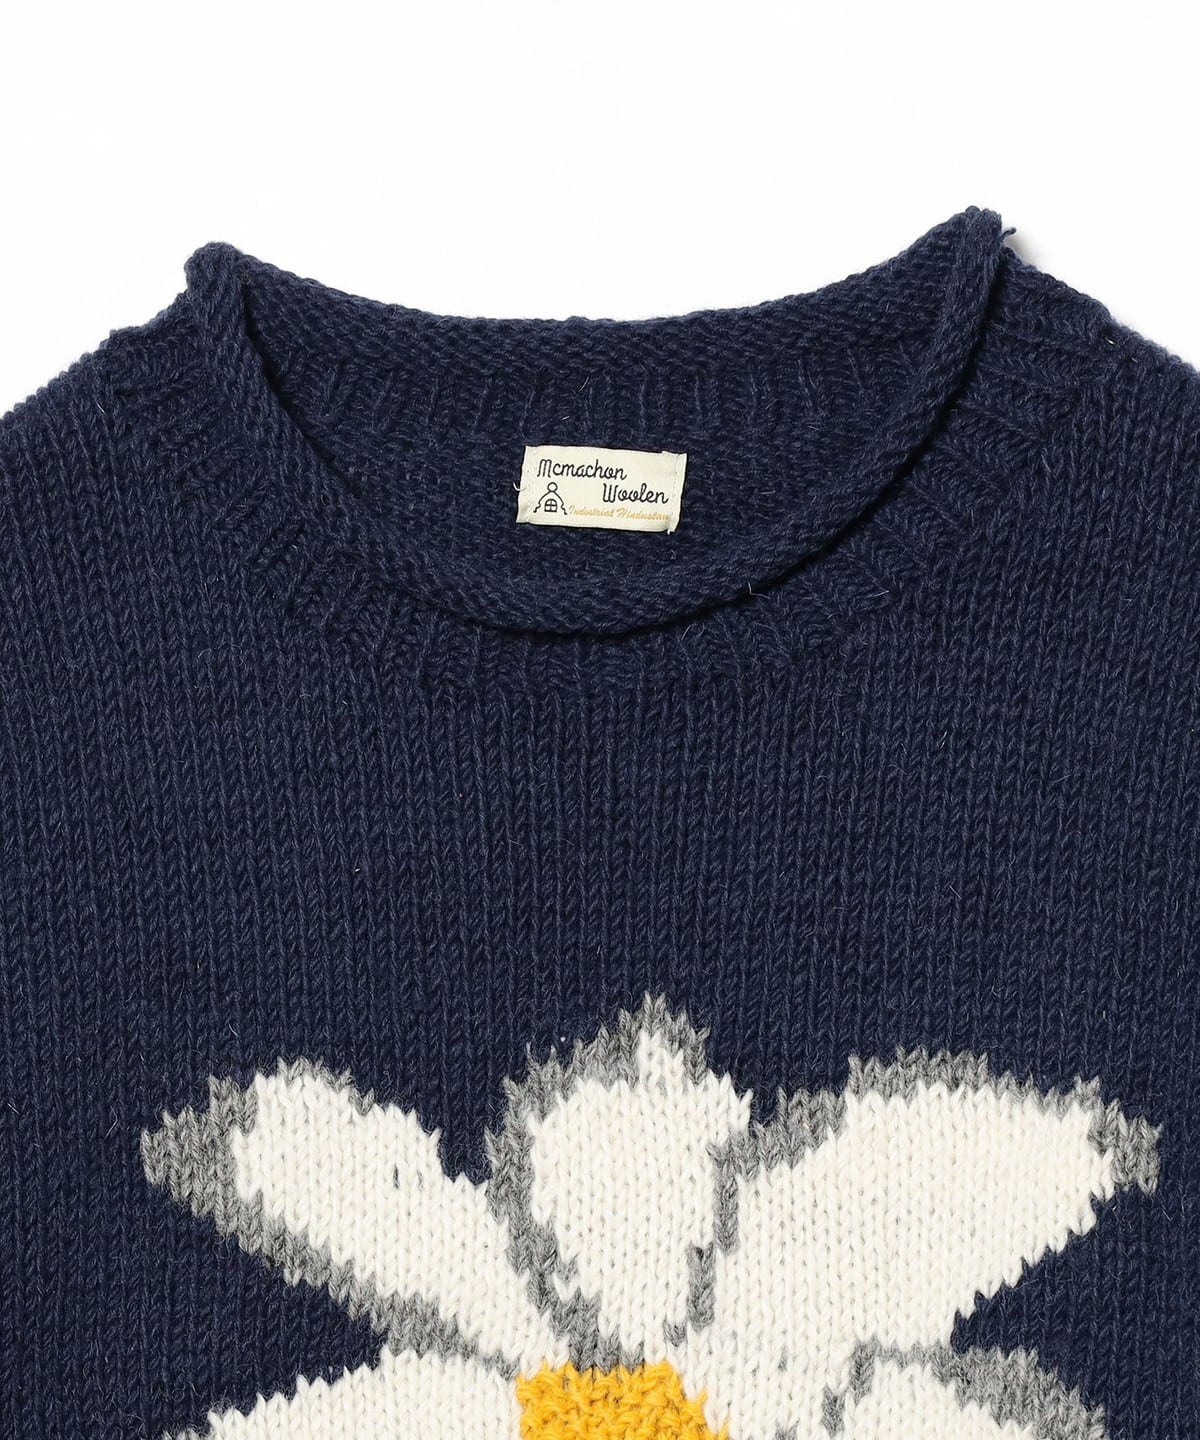 BEAMS（ビームス）MacMahon Knitting Mills / Roll Neck Knit - Flower